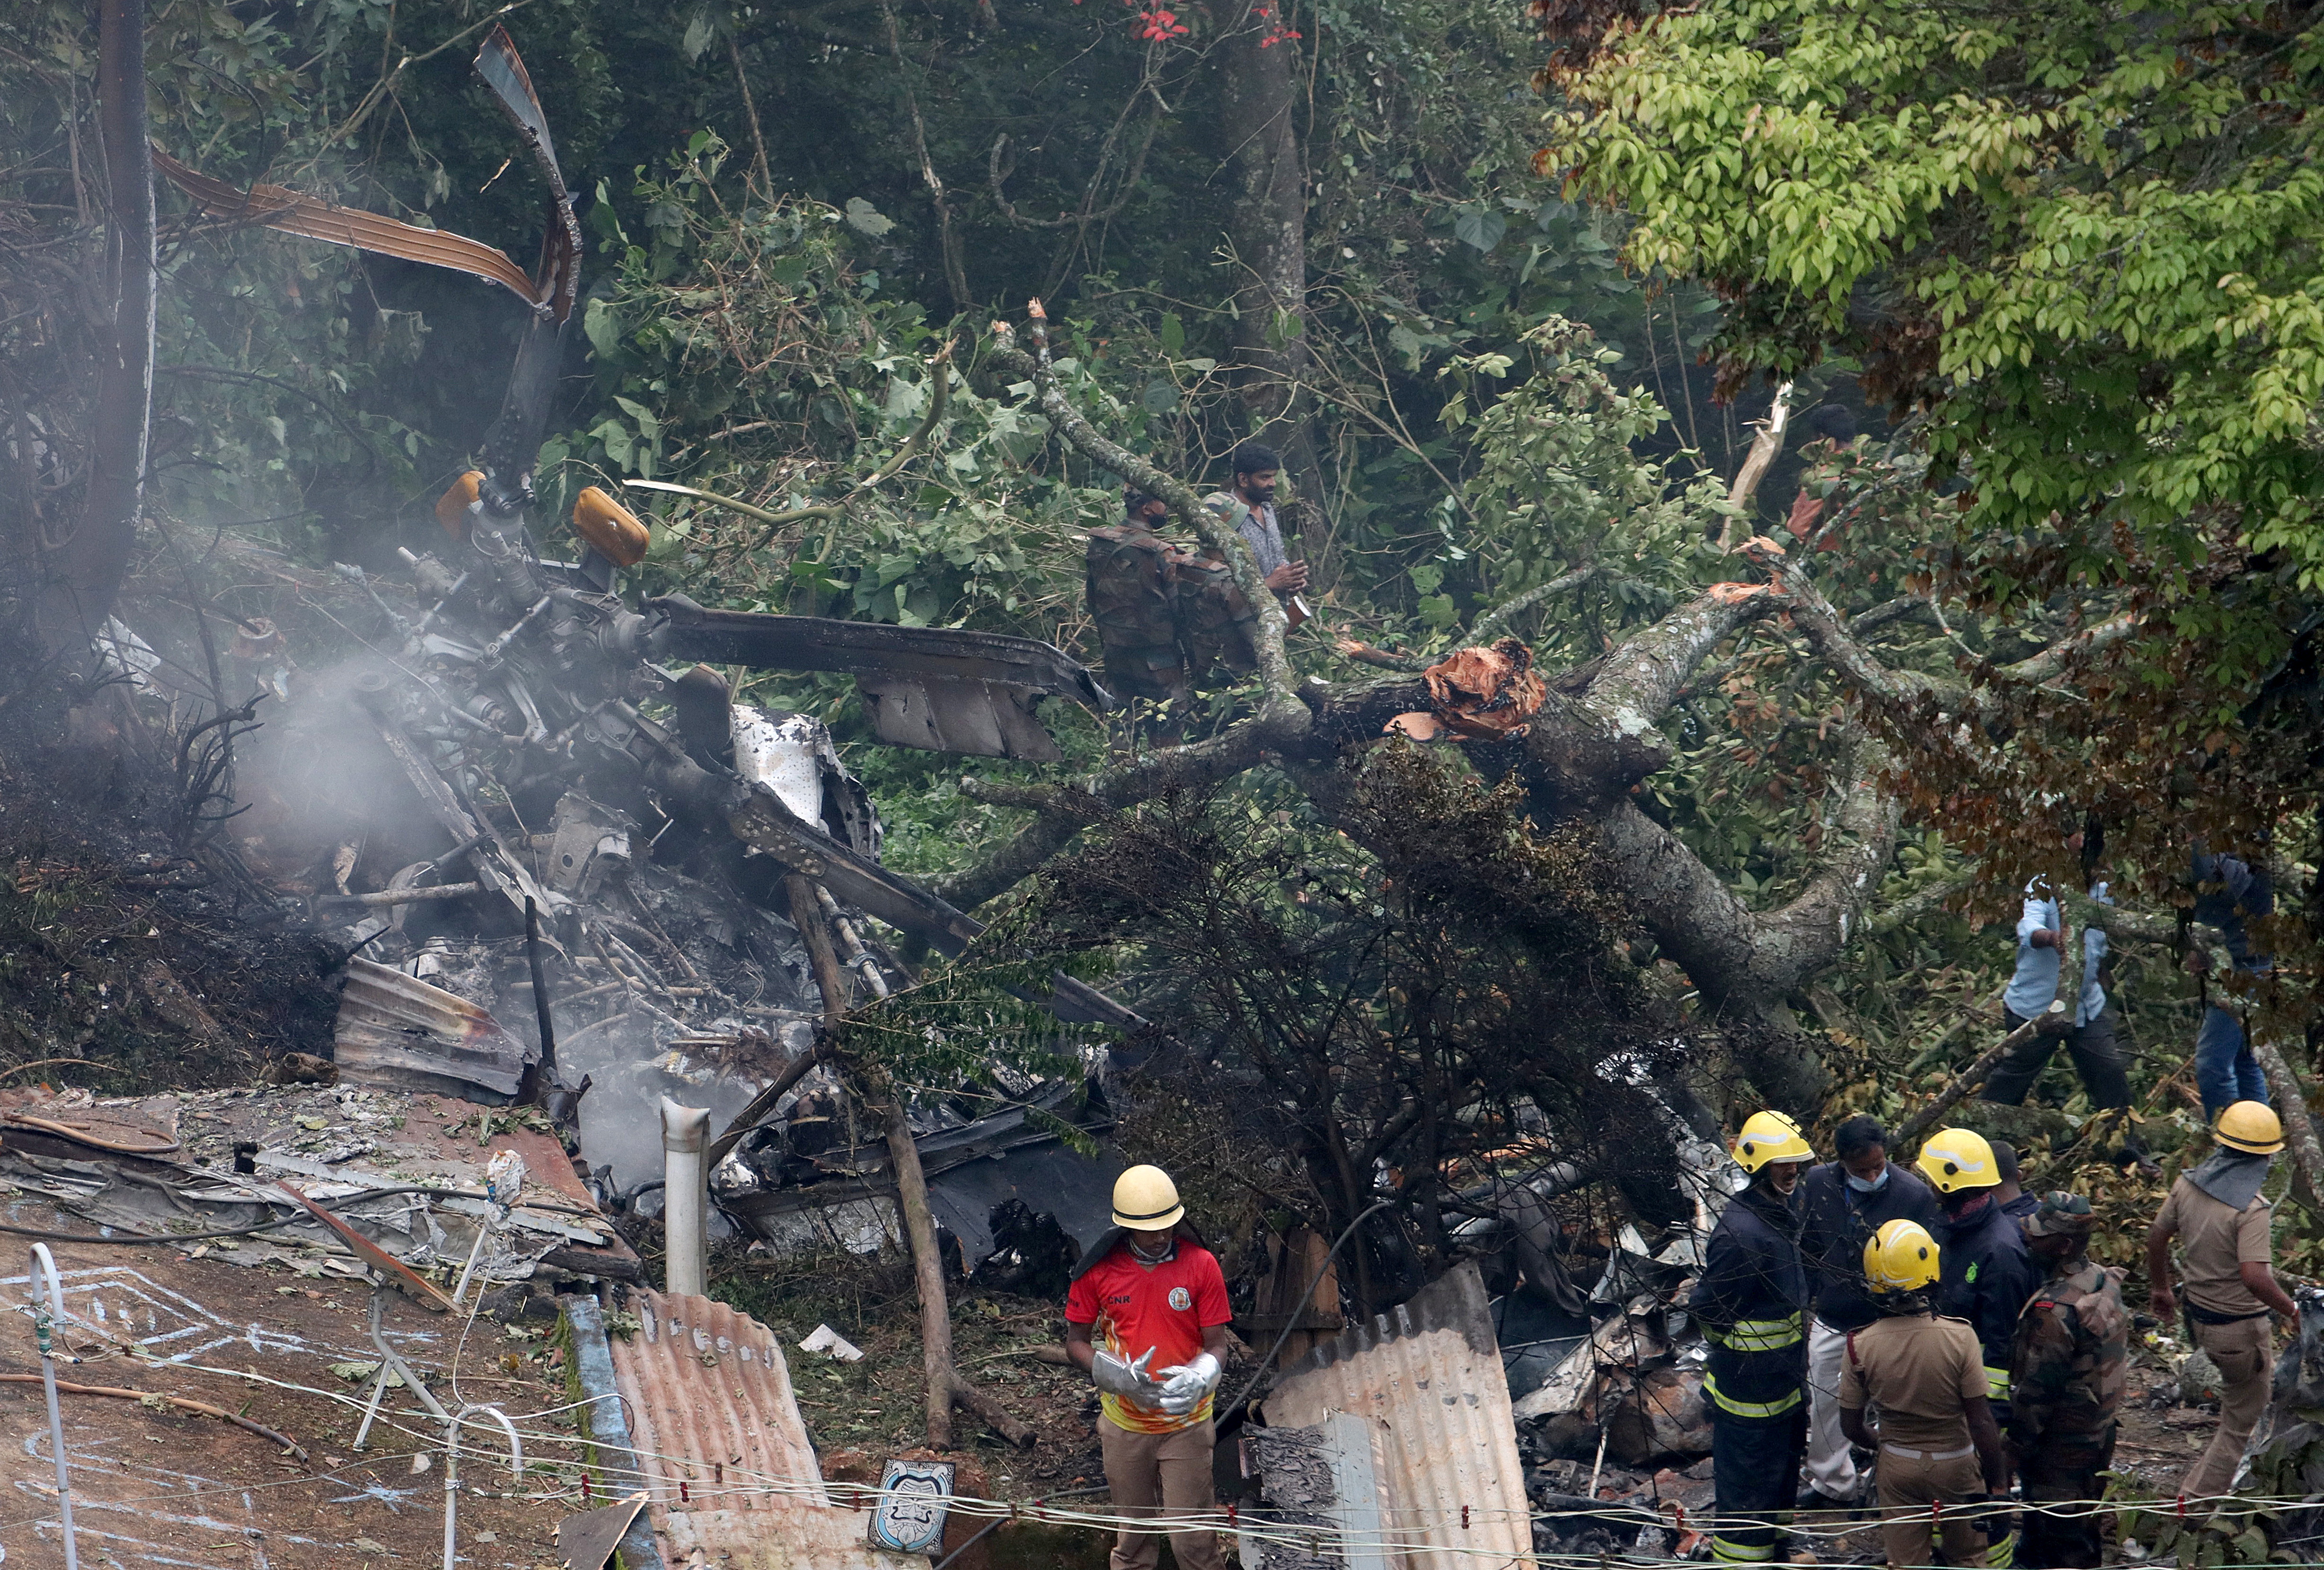 Rescuers stand near the debris of the Russian-made Mi-17V5 helicopter after it crashed near the town of Coonoor in the southern state of Tamil Nadu, India, December 8, 2021. REUTERS/Stringer NO ARCHIVES. NO RESALES.